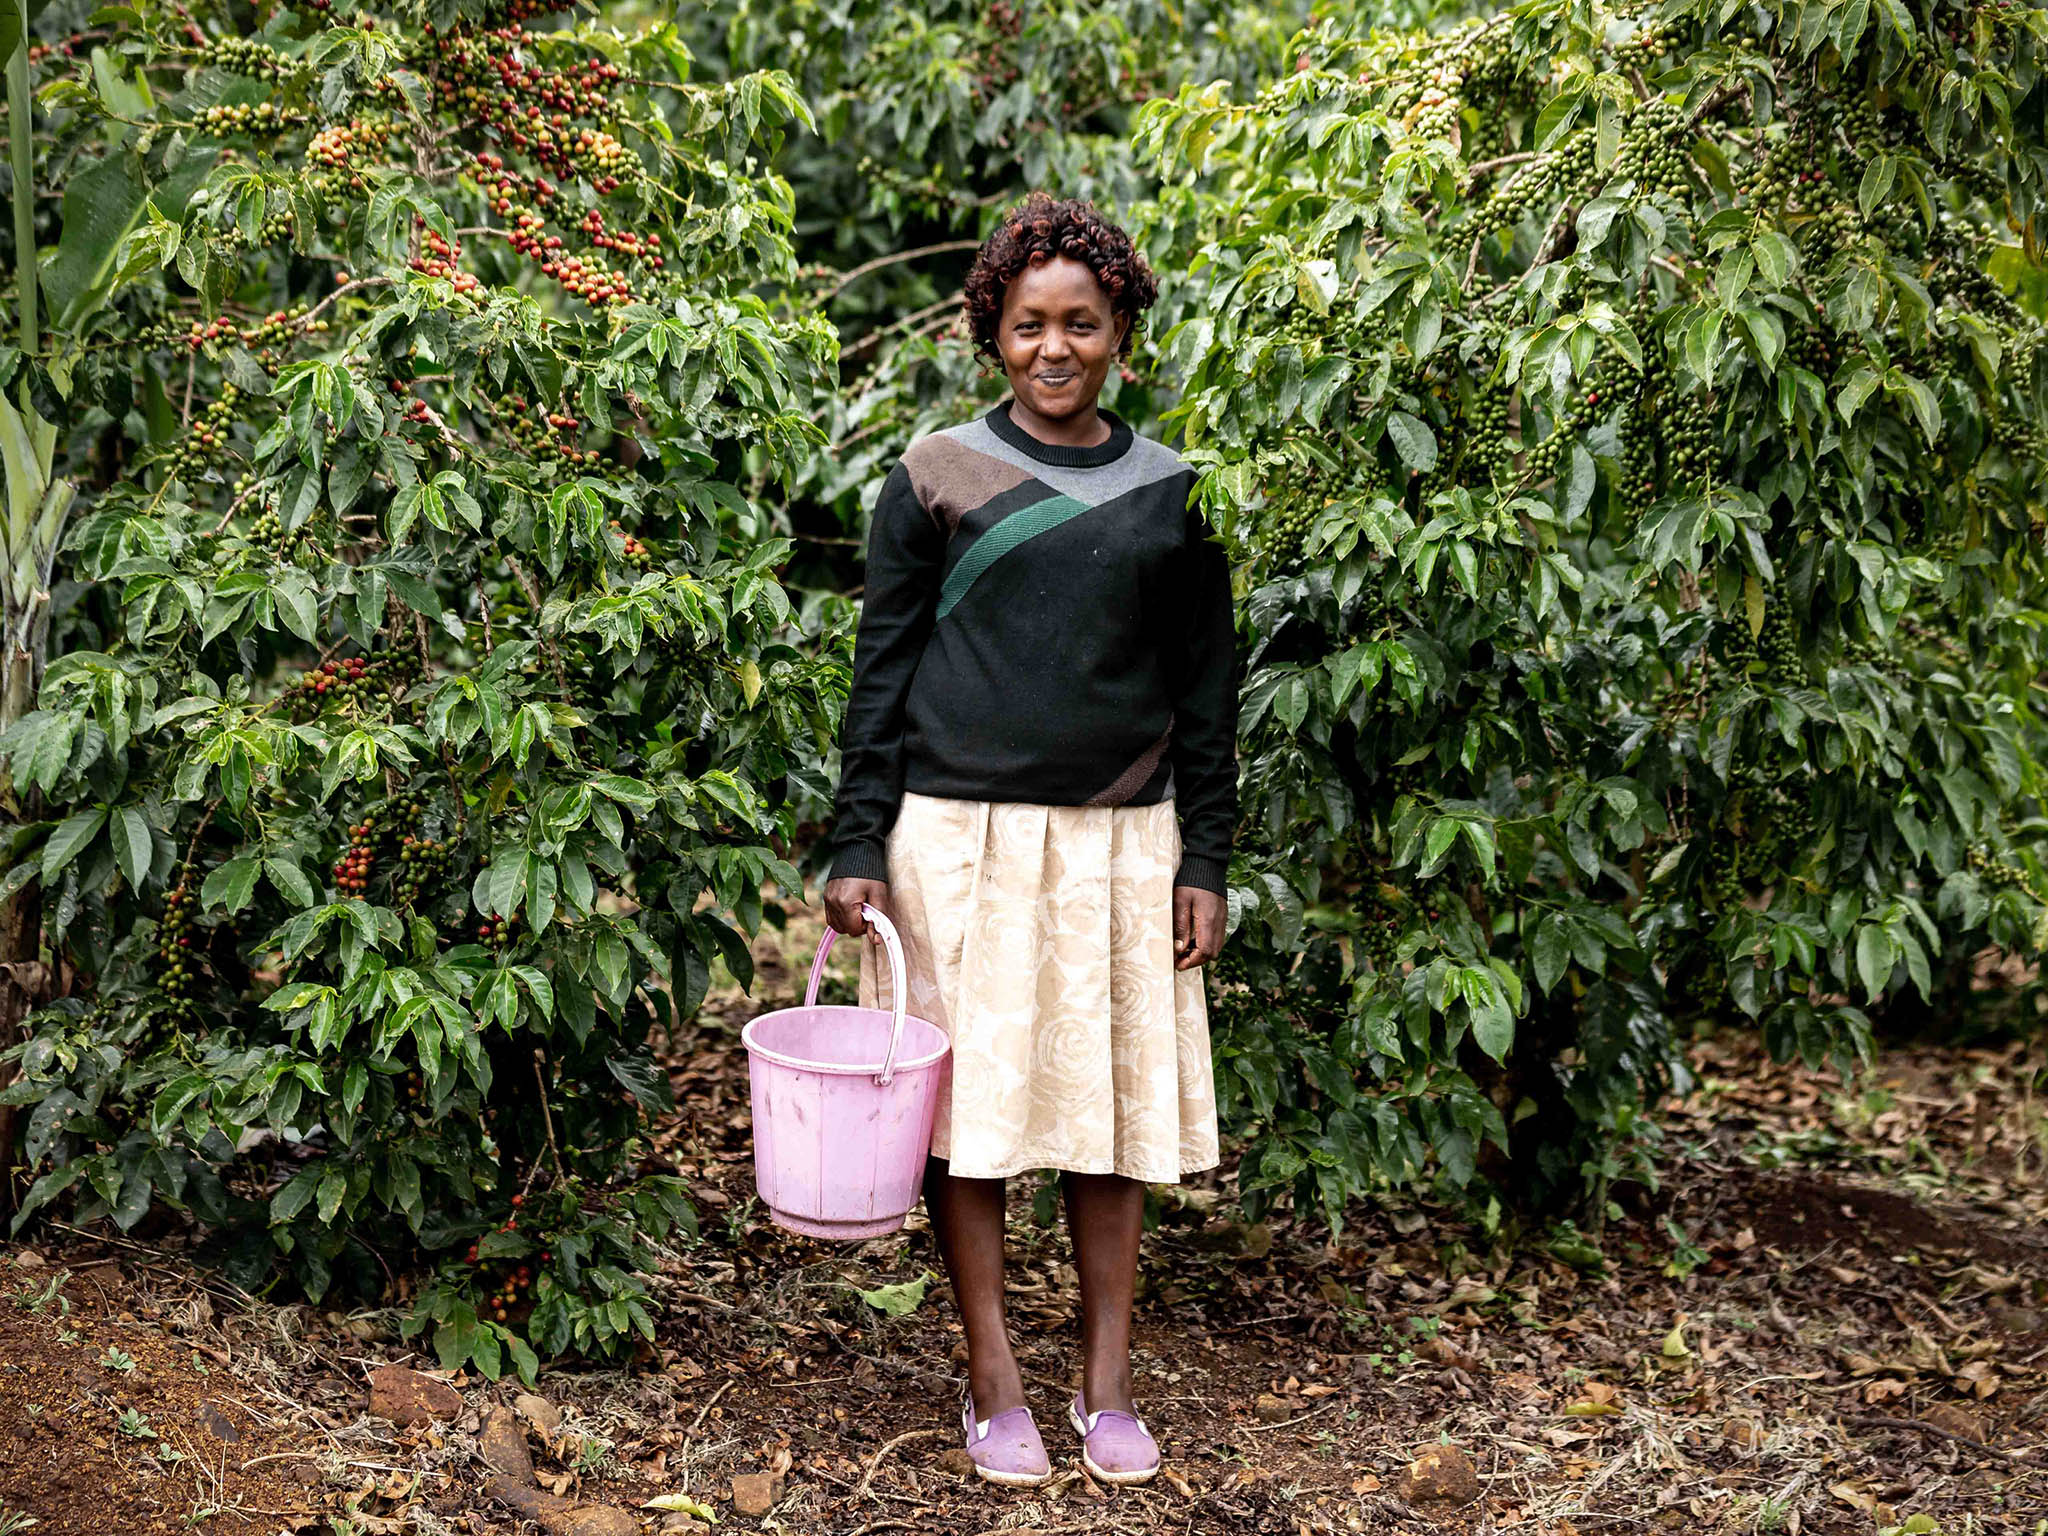 Women in Coffee: 75 per cent of the coffee cherries harvested by the women – like Gladys Chepkemoi from Kabngetuny FCS here – are now of premium quality, up from 25 per cent when the project began